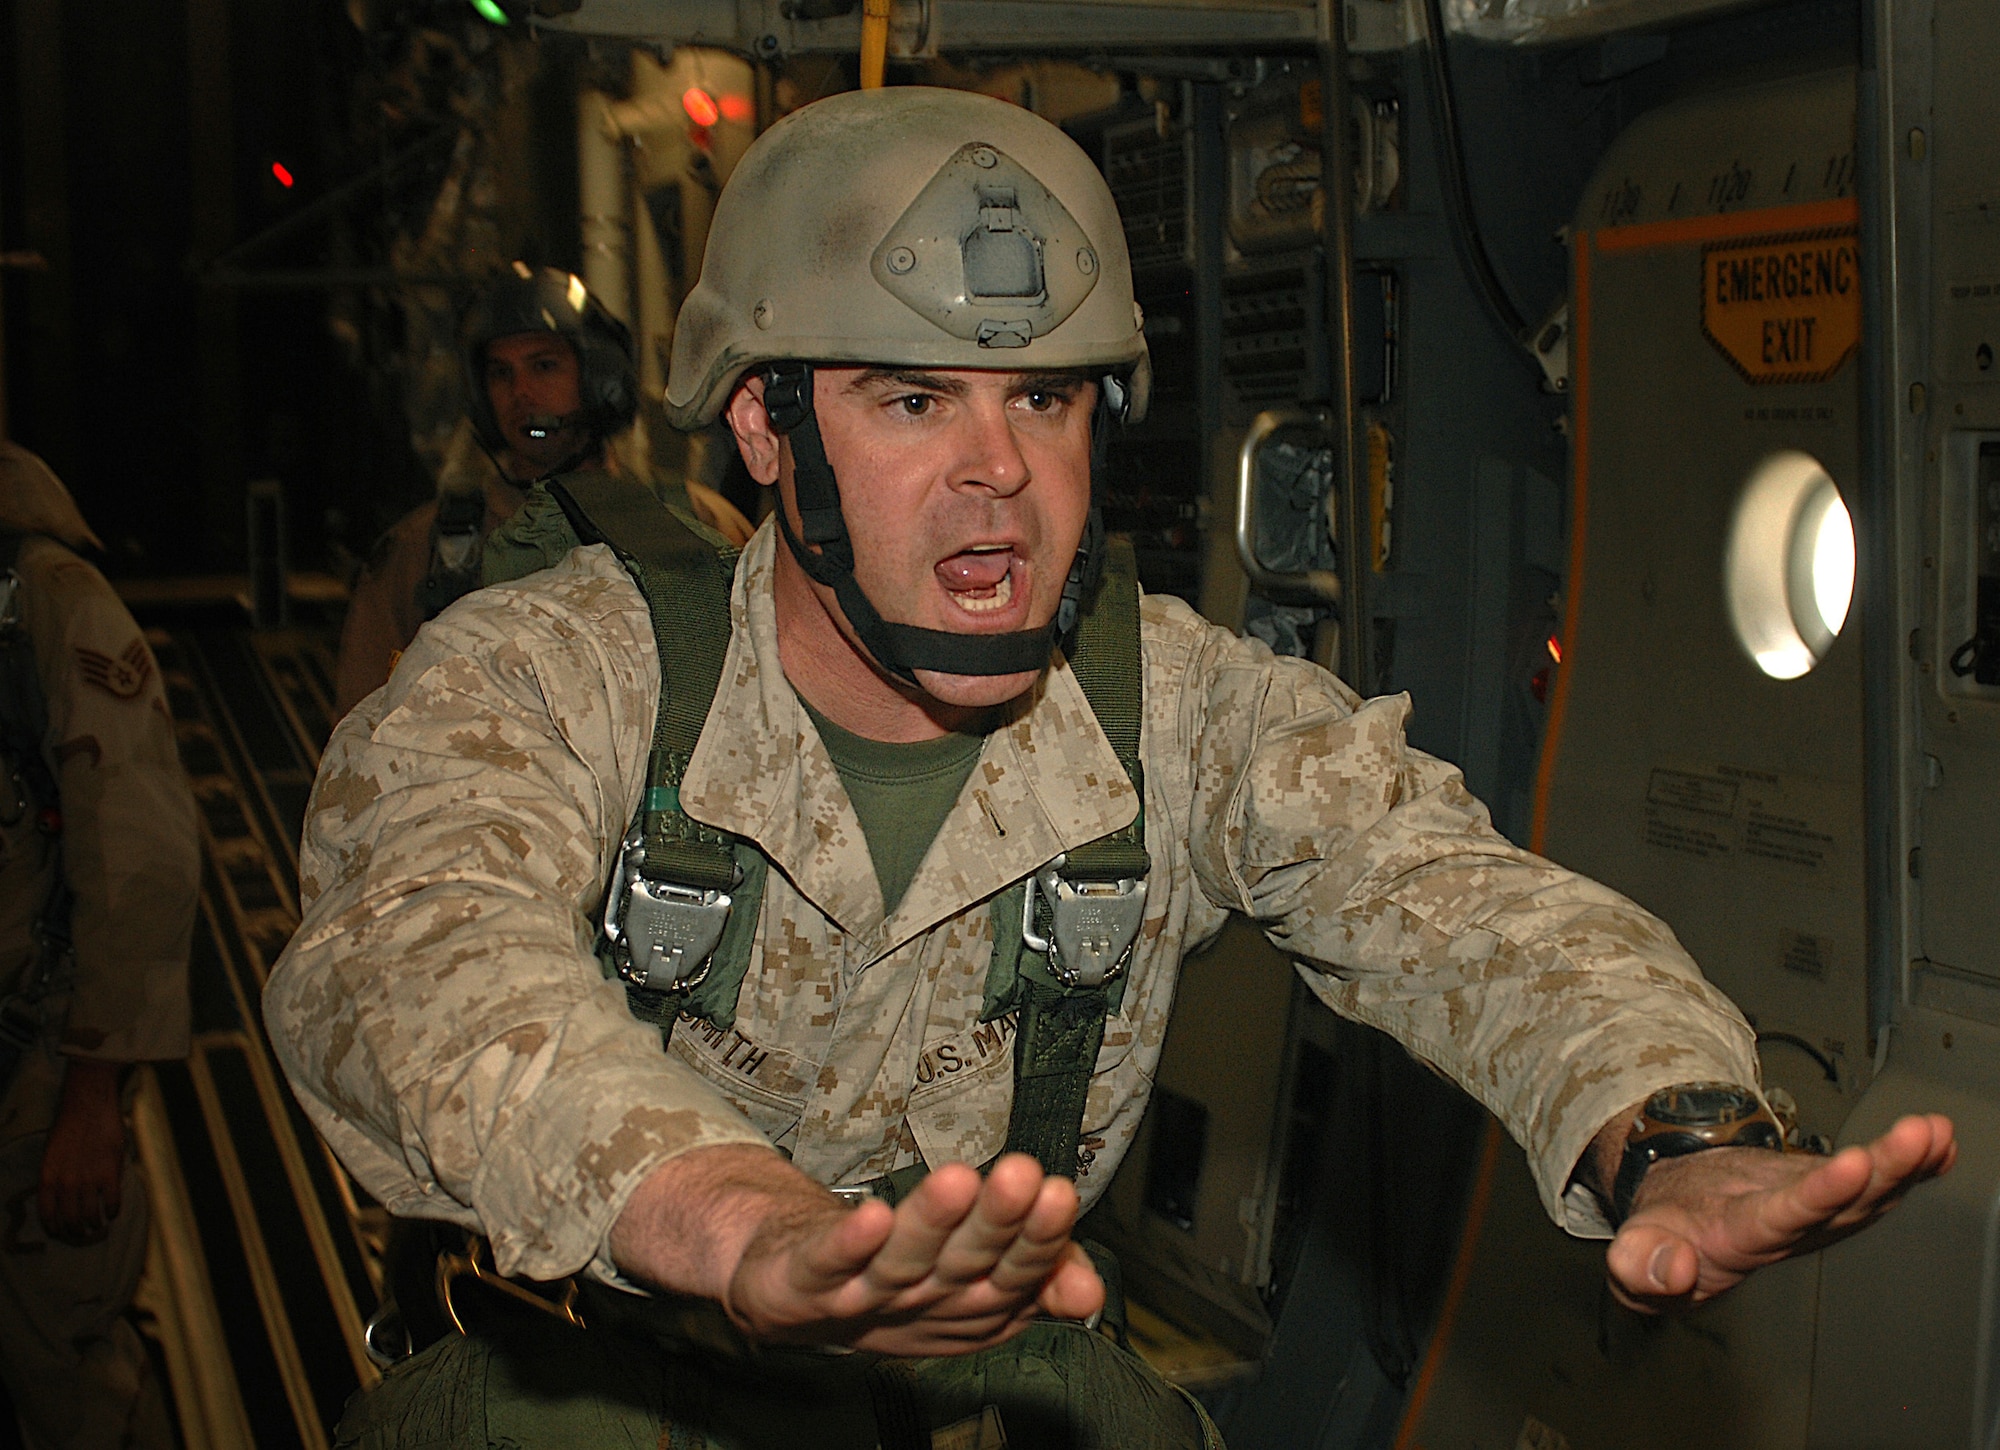 U.S. Marine Corps Gunnery Sgt. Nathan Smith prepares to jump from a Charleston AFB C-17 aircraft into Cairo, Egypt, Nov. 10 as part of Exercise Bright Star 2007. (U.S Air Force photo/Staff Sgt. Aaron Allmon)